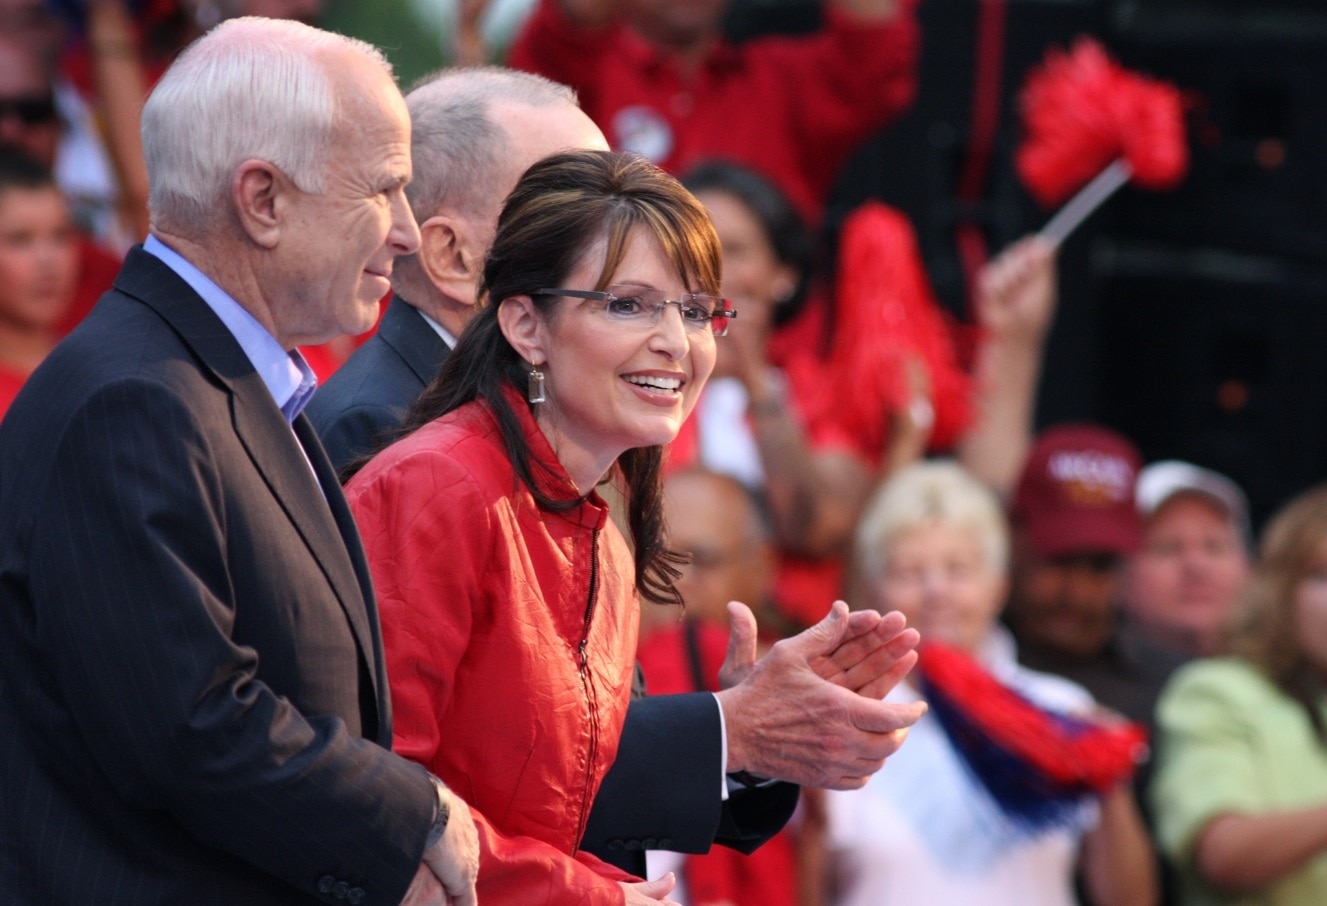 2008 file image:Republican vice presidential candidate Alaska Gov. Sarah Palin, smiles while on stage between Republican presidential candidate Sen. John McCain